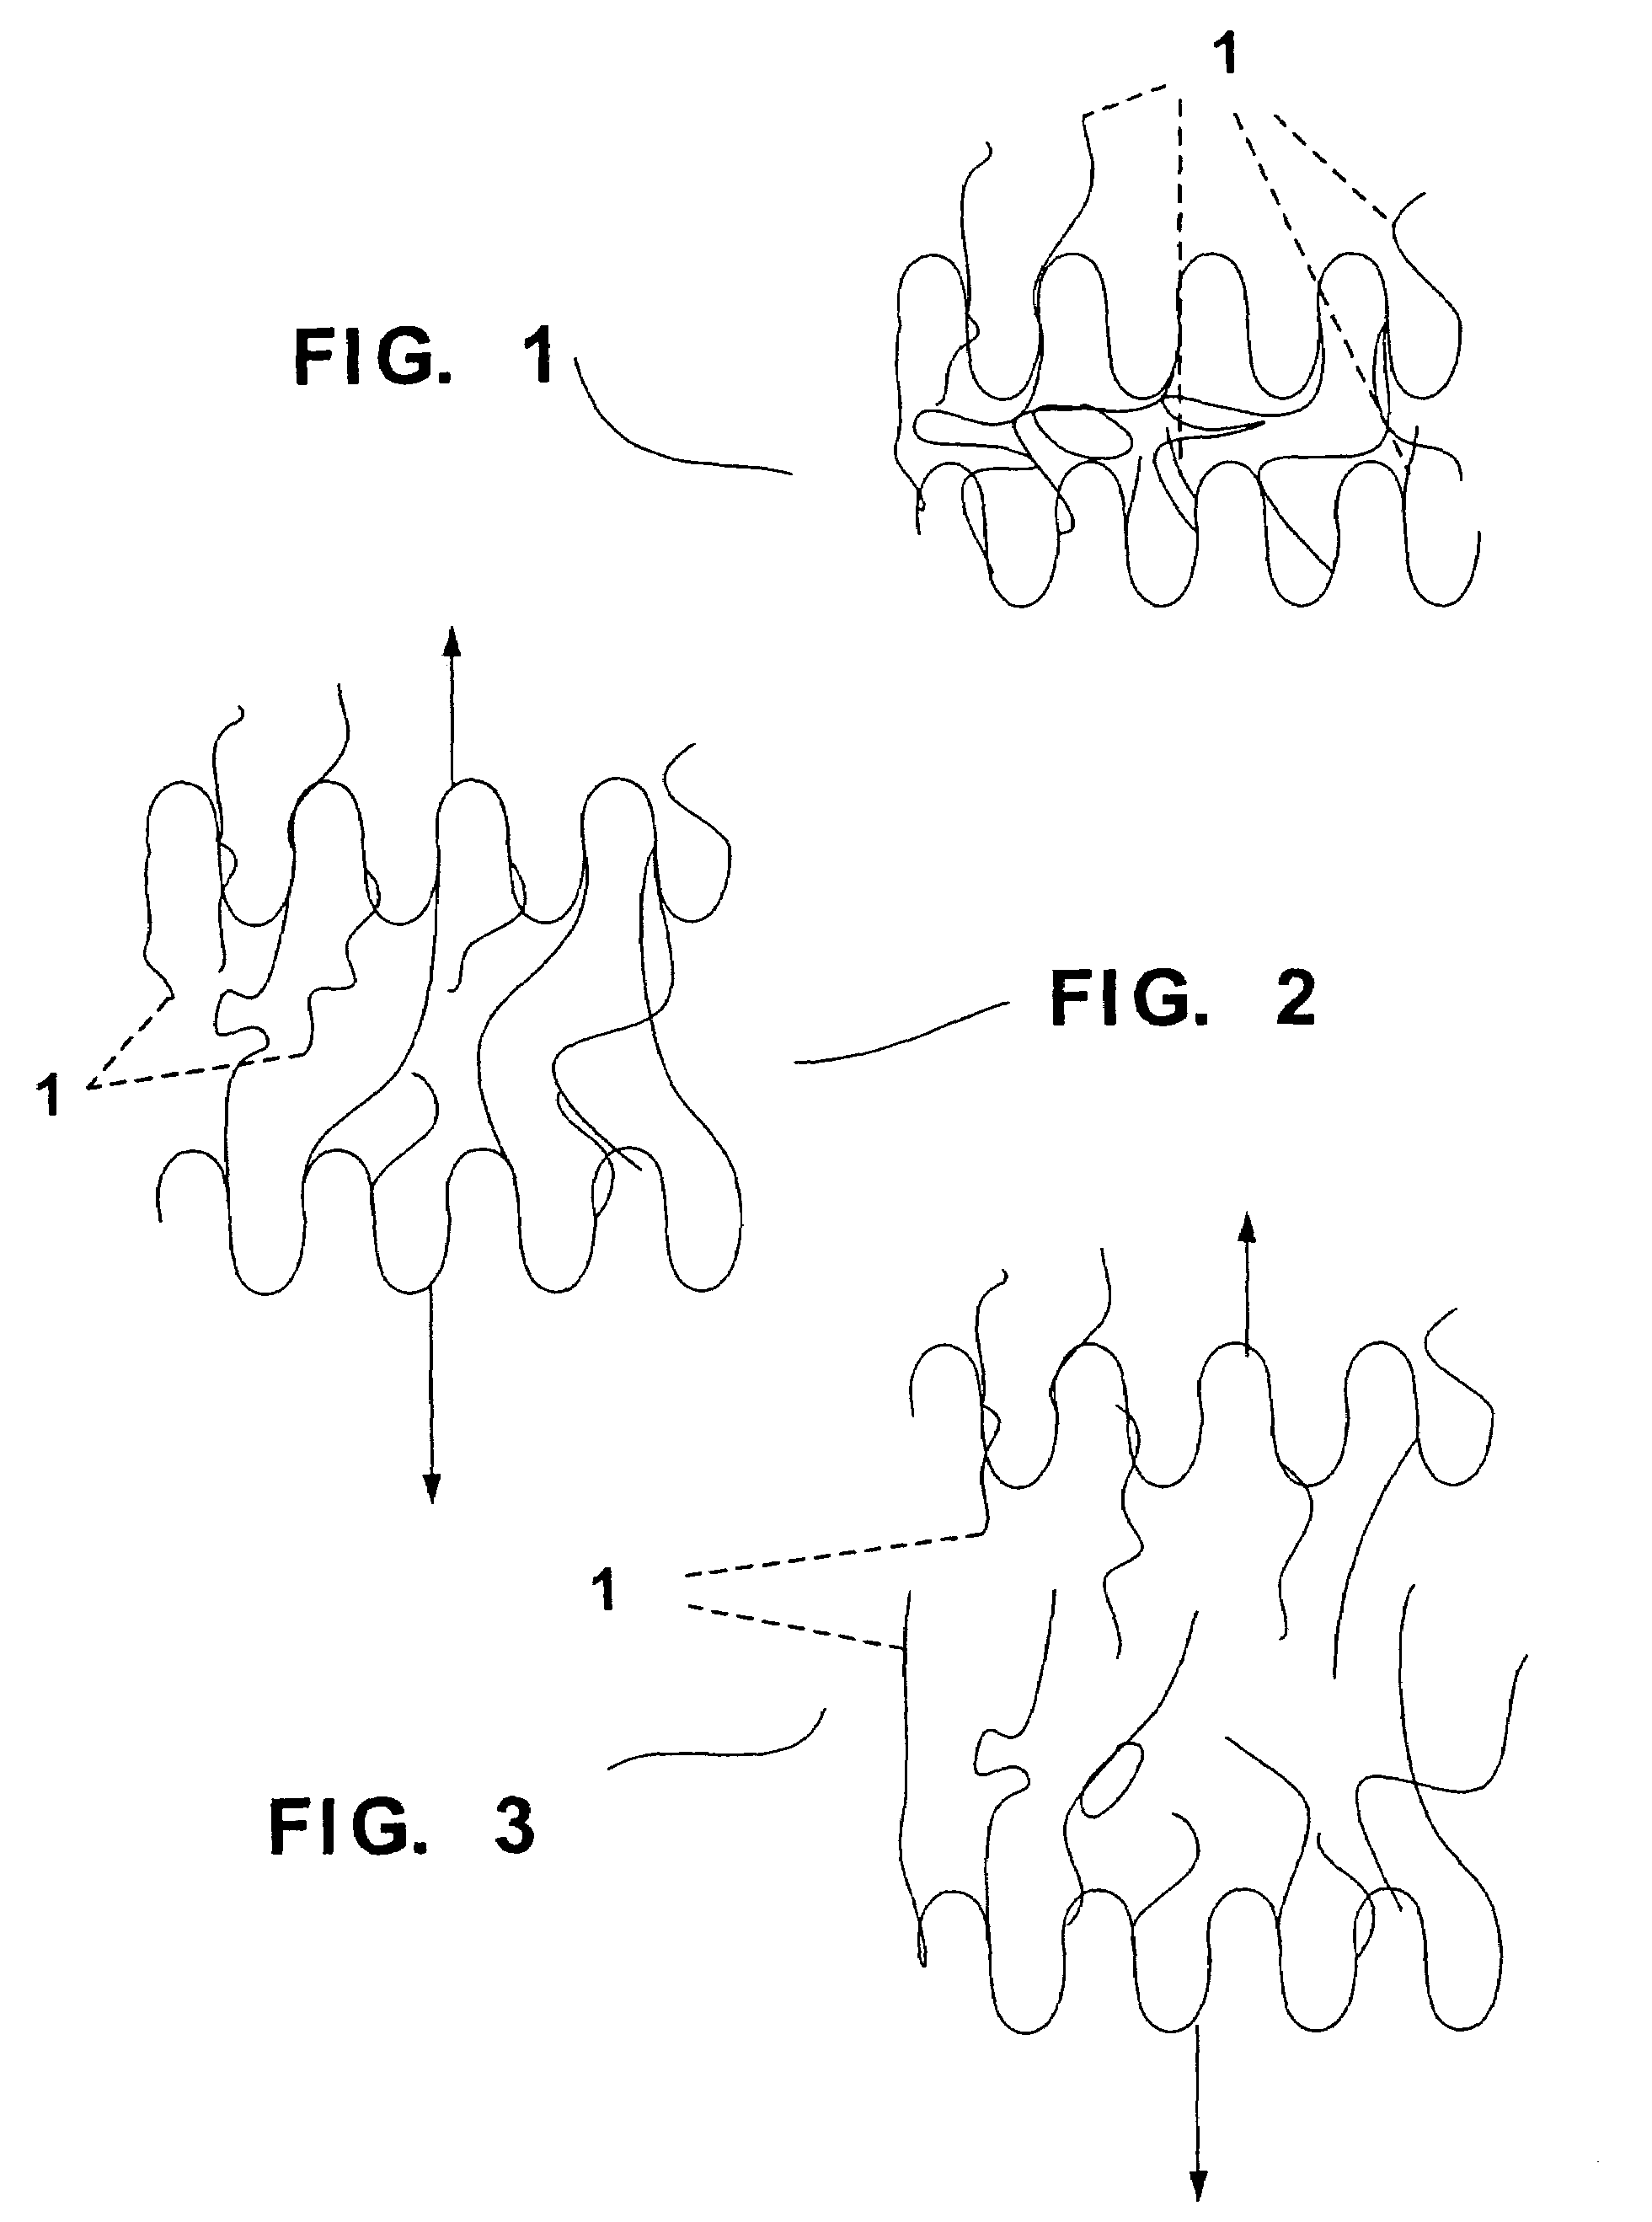 Melt blended high density polyethylene compositions with enhanced properties and method for producing the same